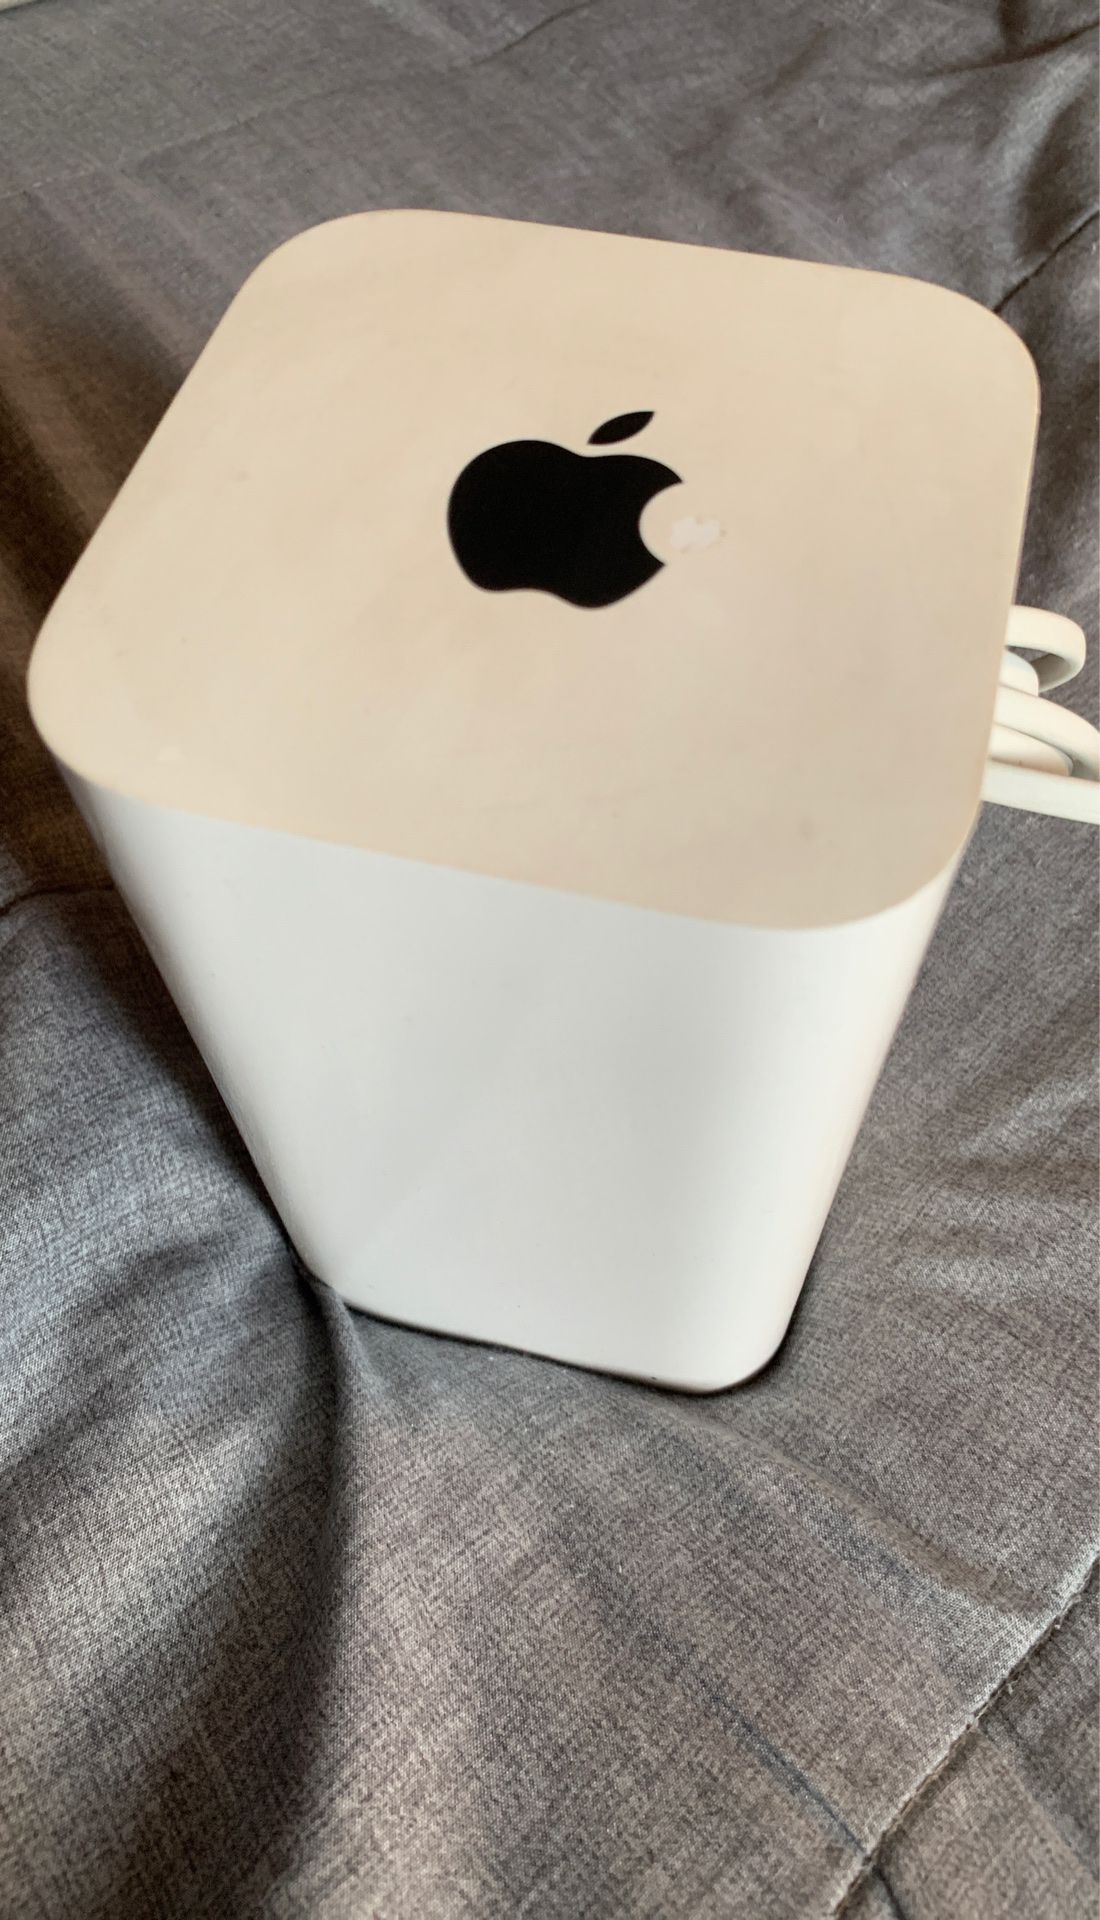 APPLE WIFI ROUTER